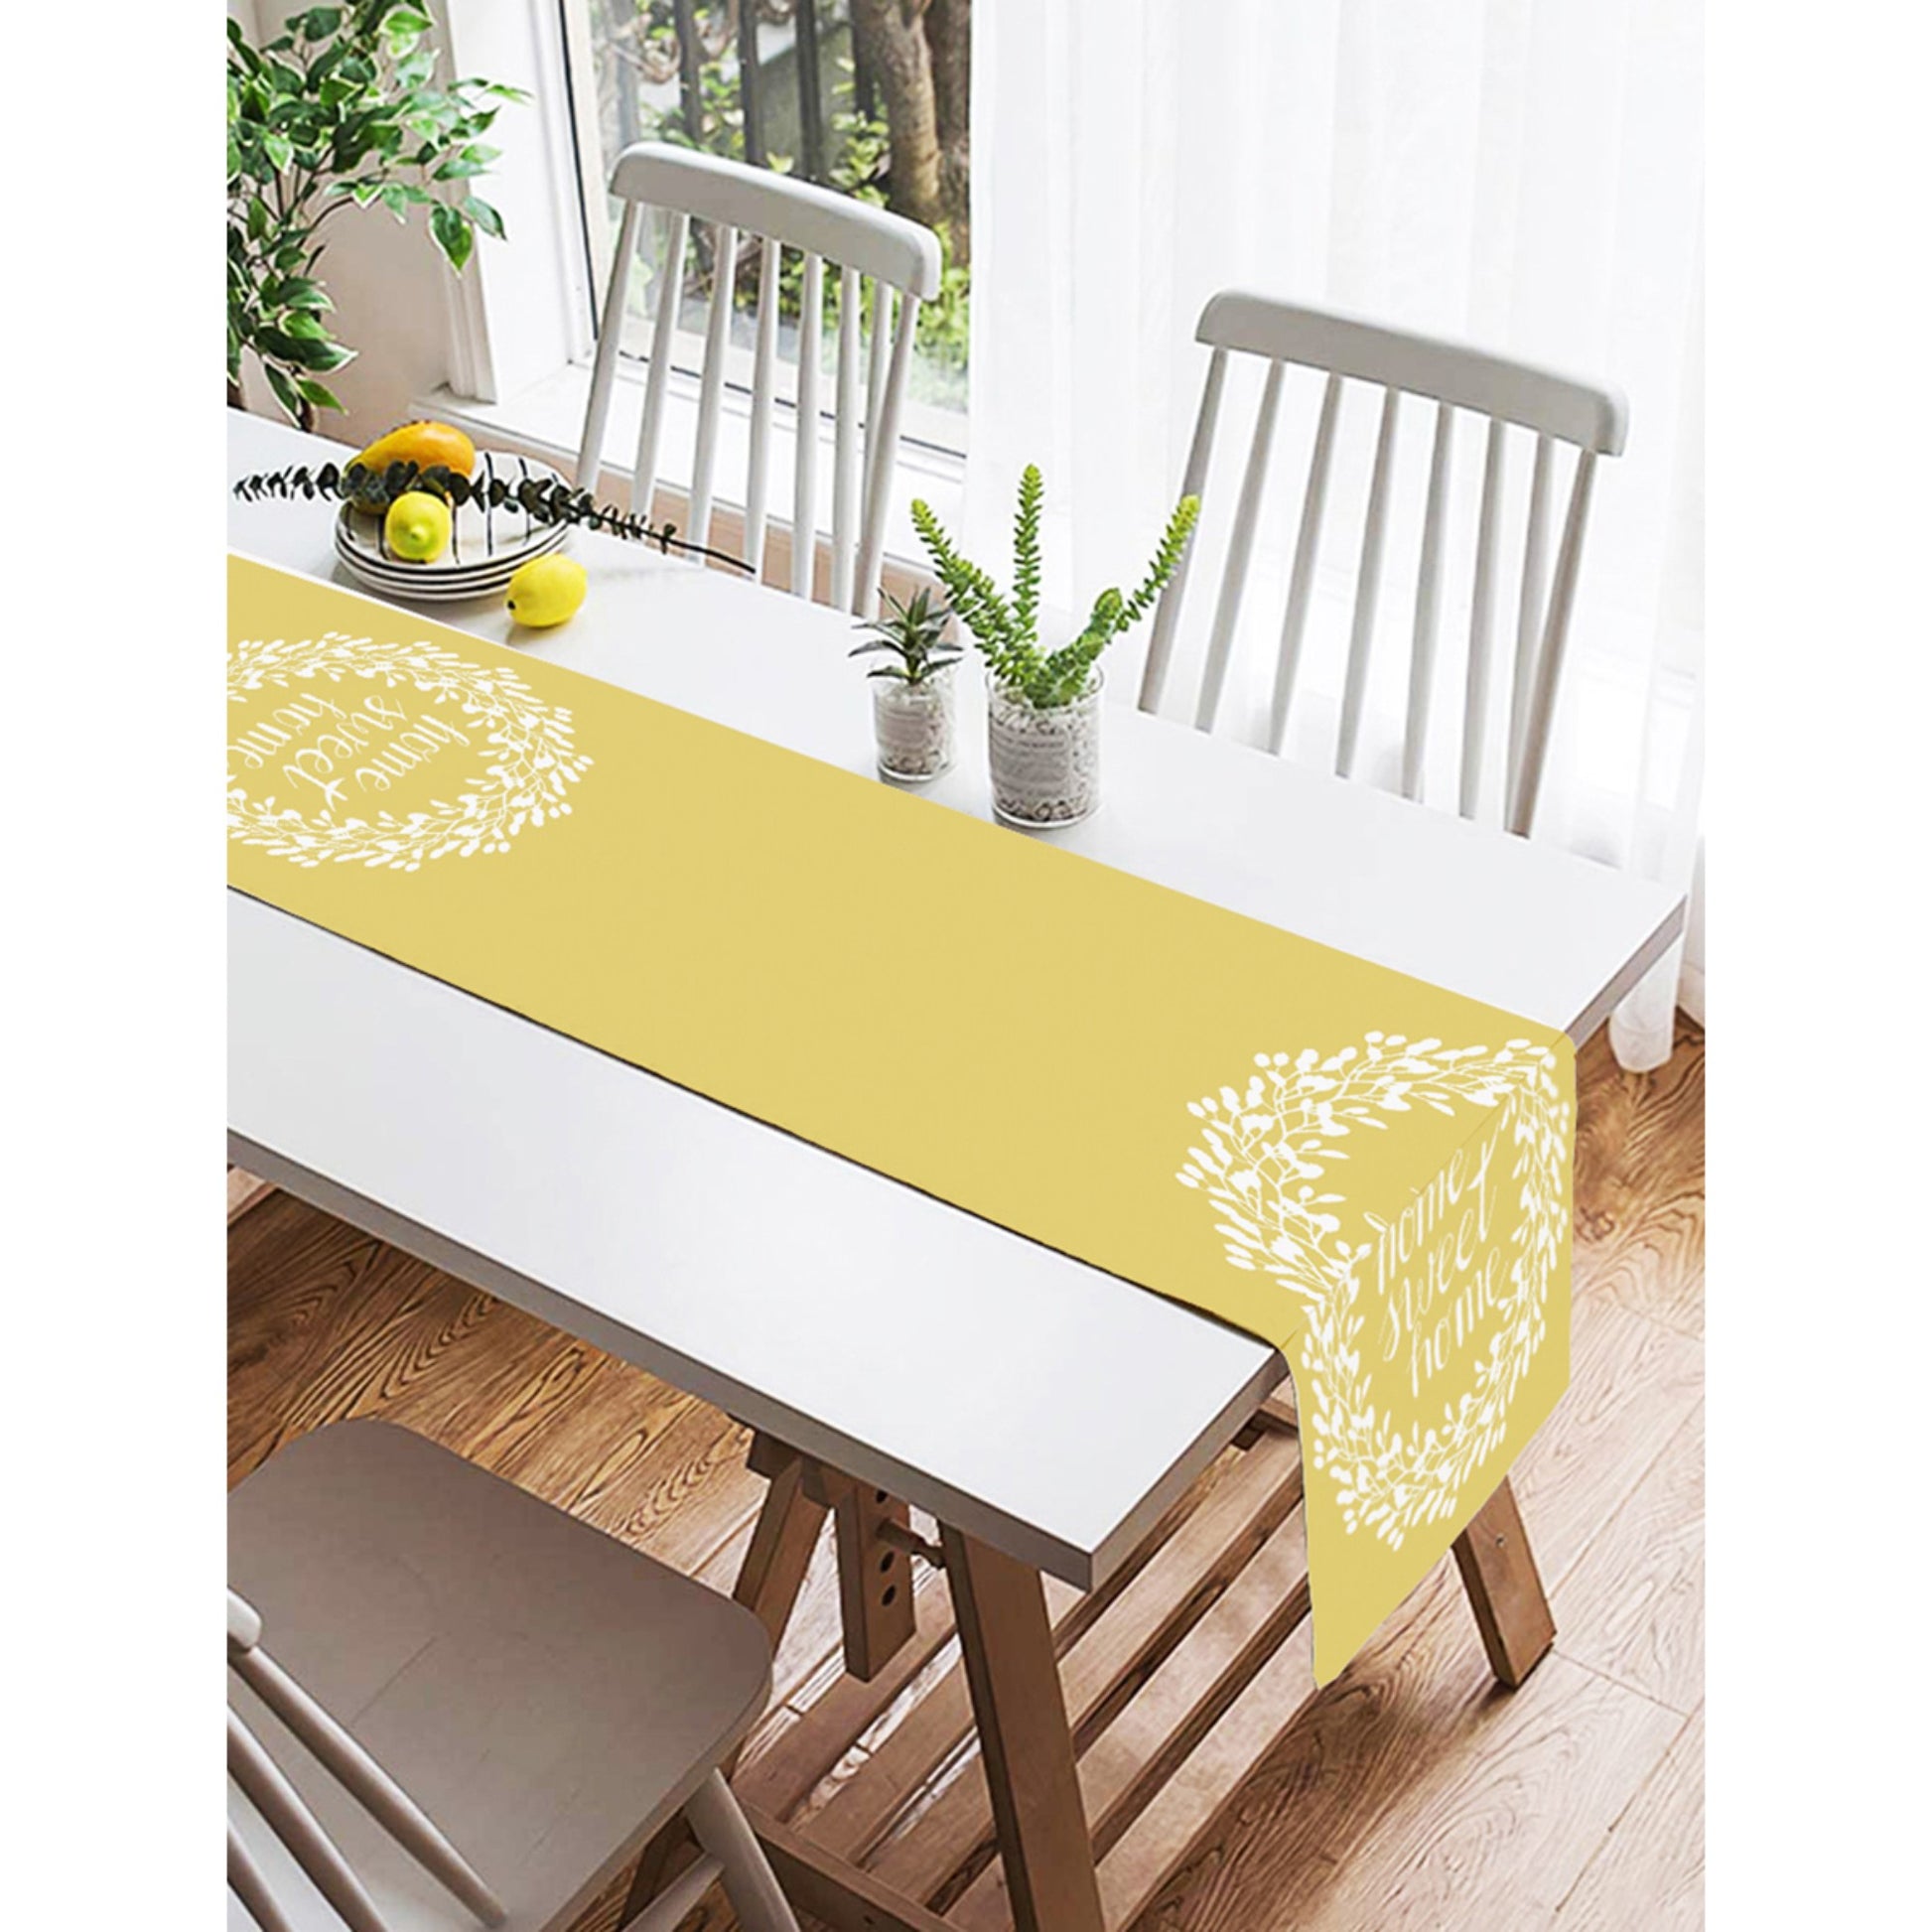 Chic yellow table runner, an elegant housewarming present for stylish dining.